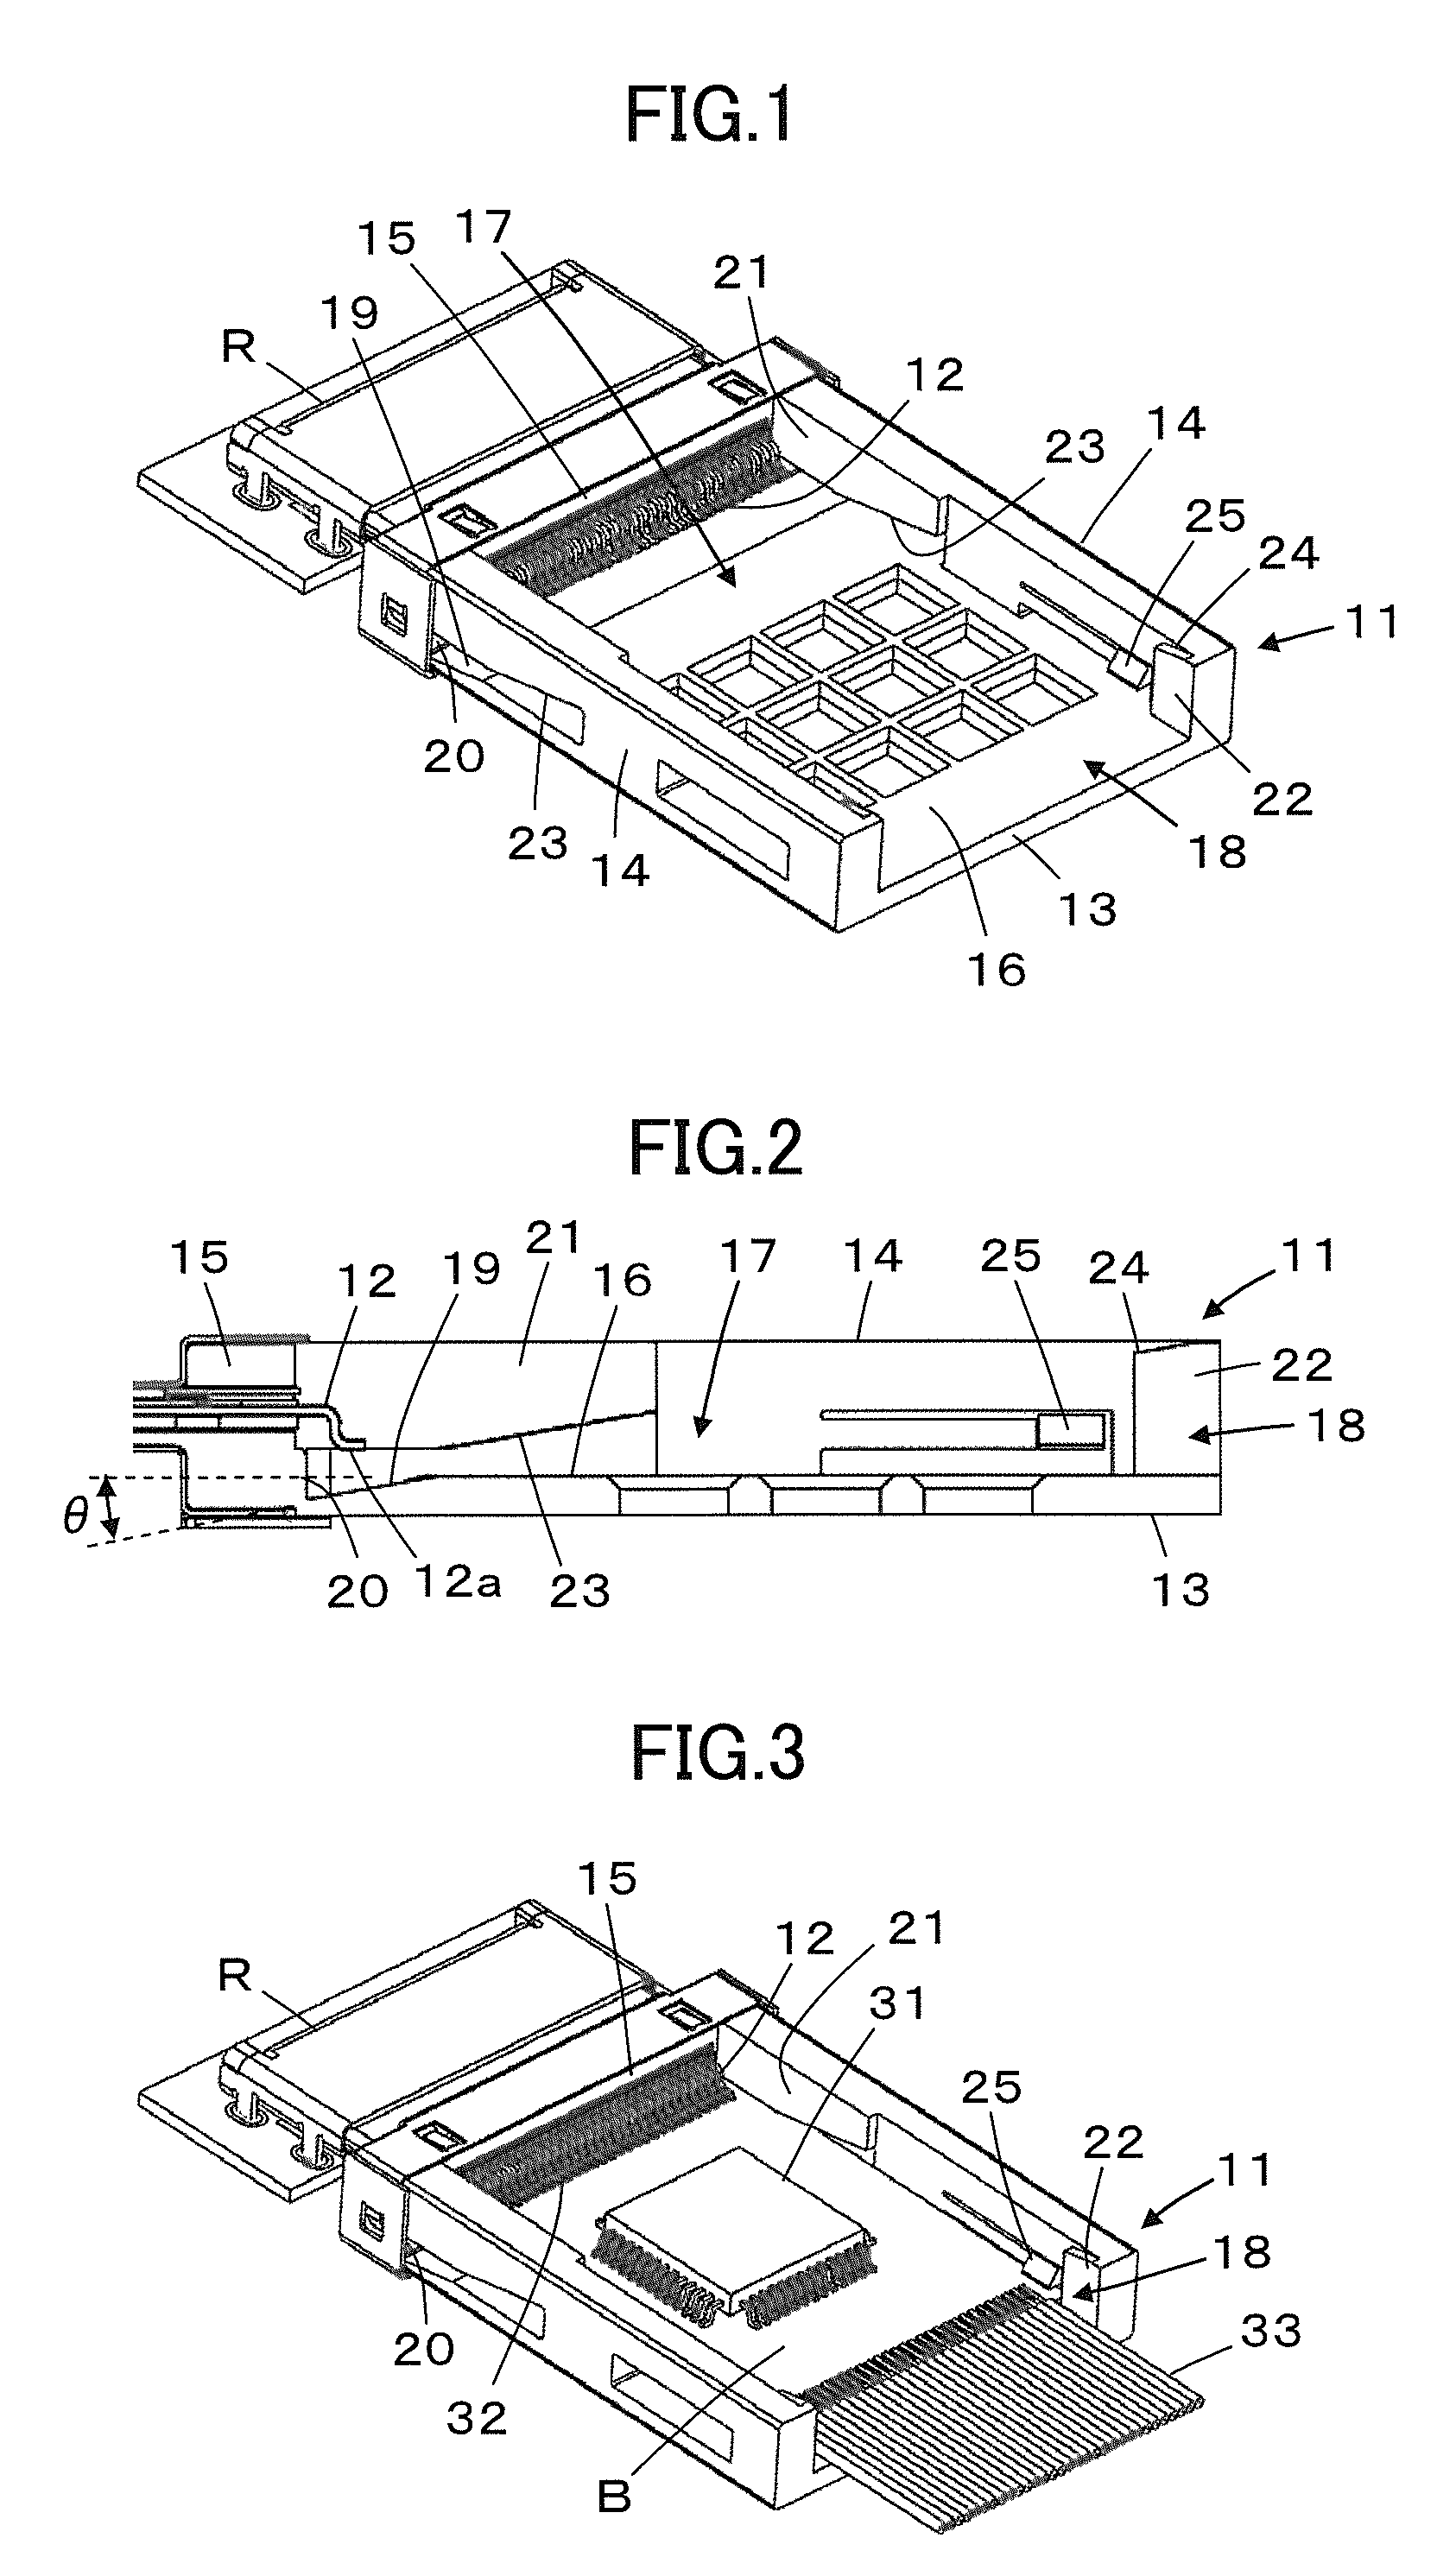 Connecting component